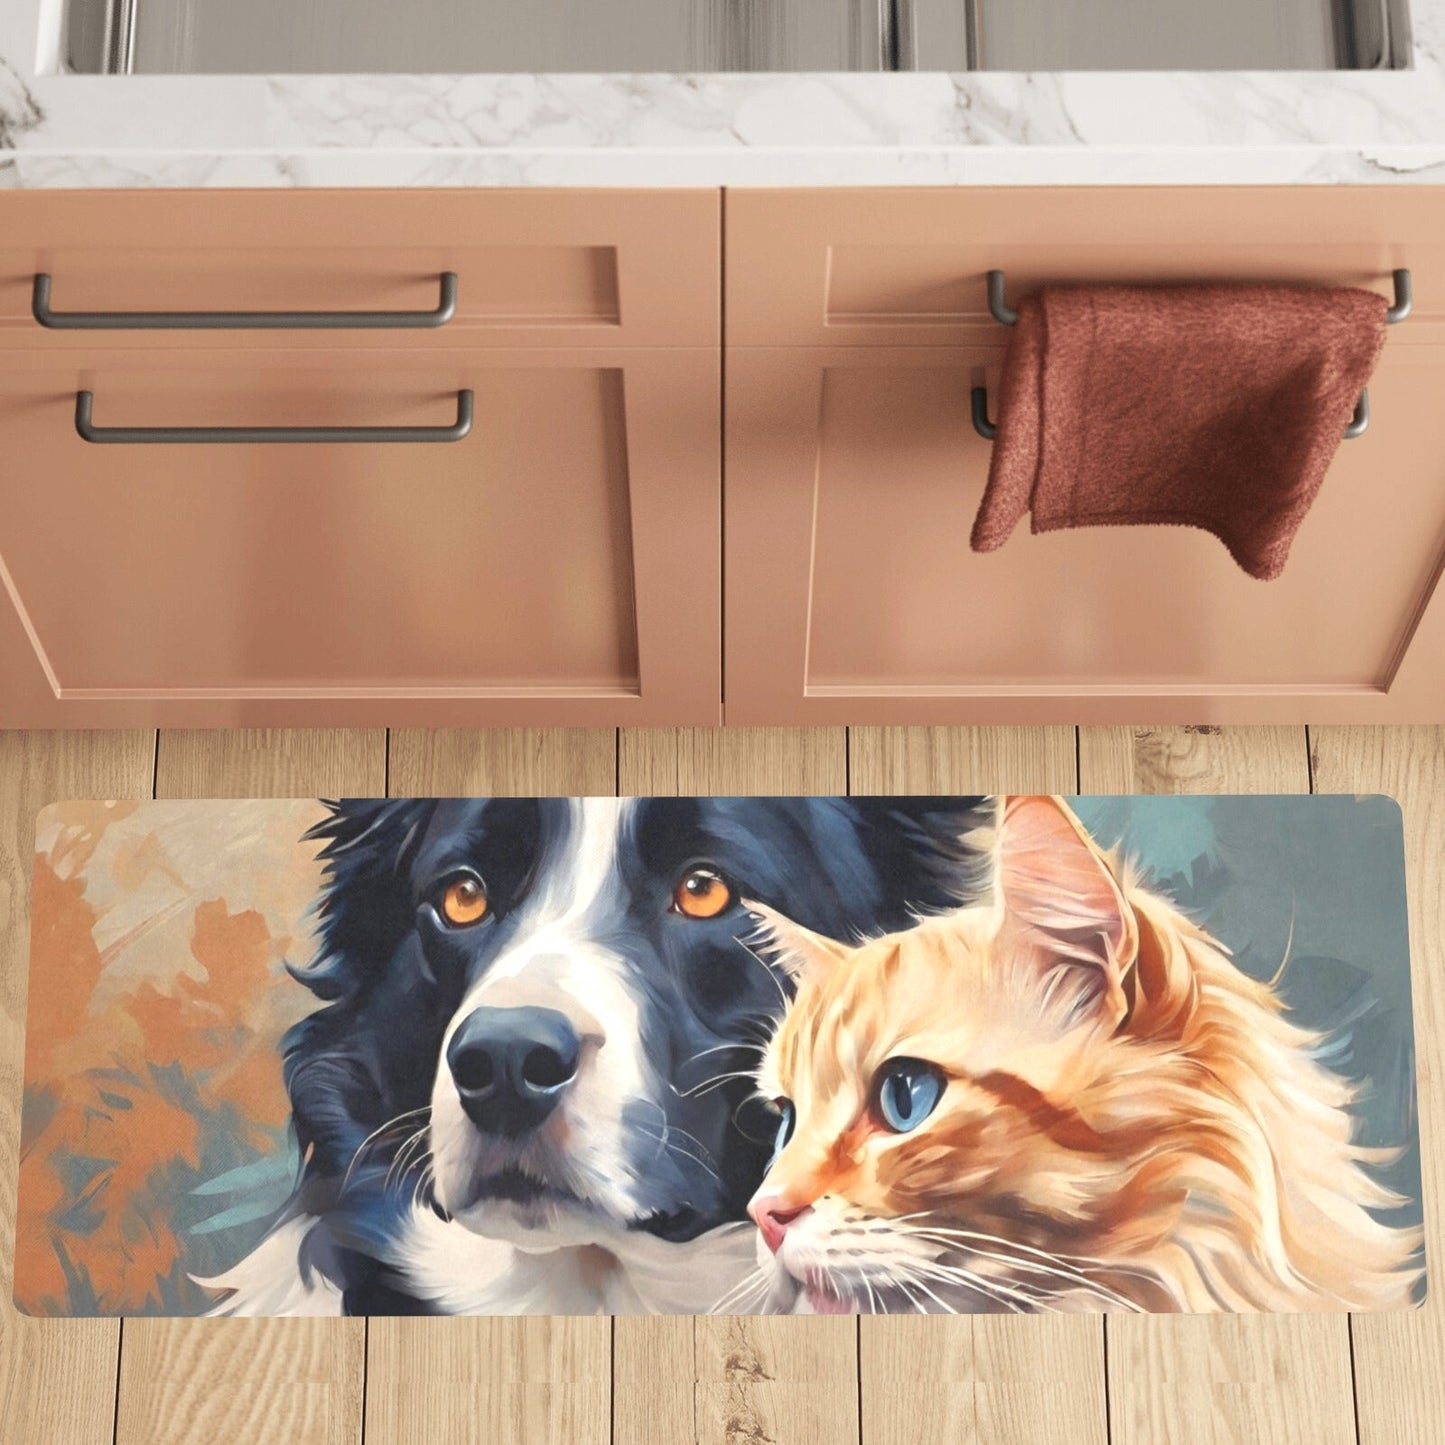 Unlikely Friends Kitchen Mat 48"x17"(Made In Queen) - Home Decor - Epileptic Al’s Shop